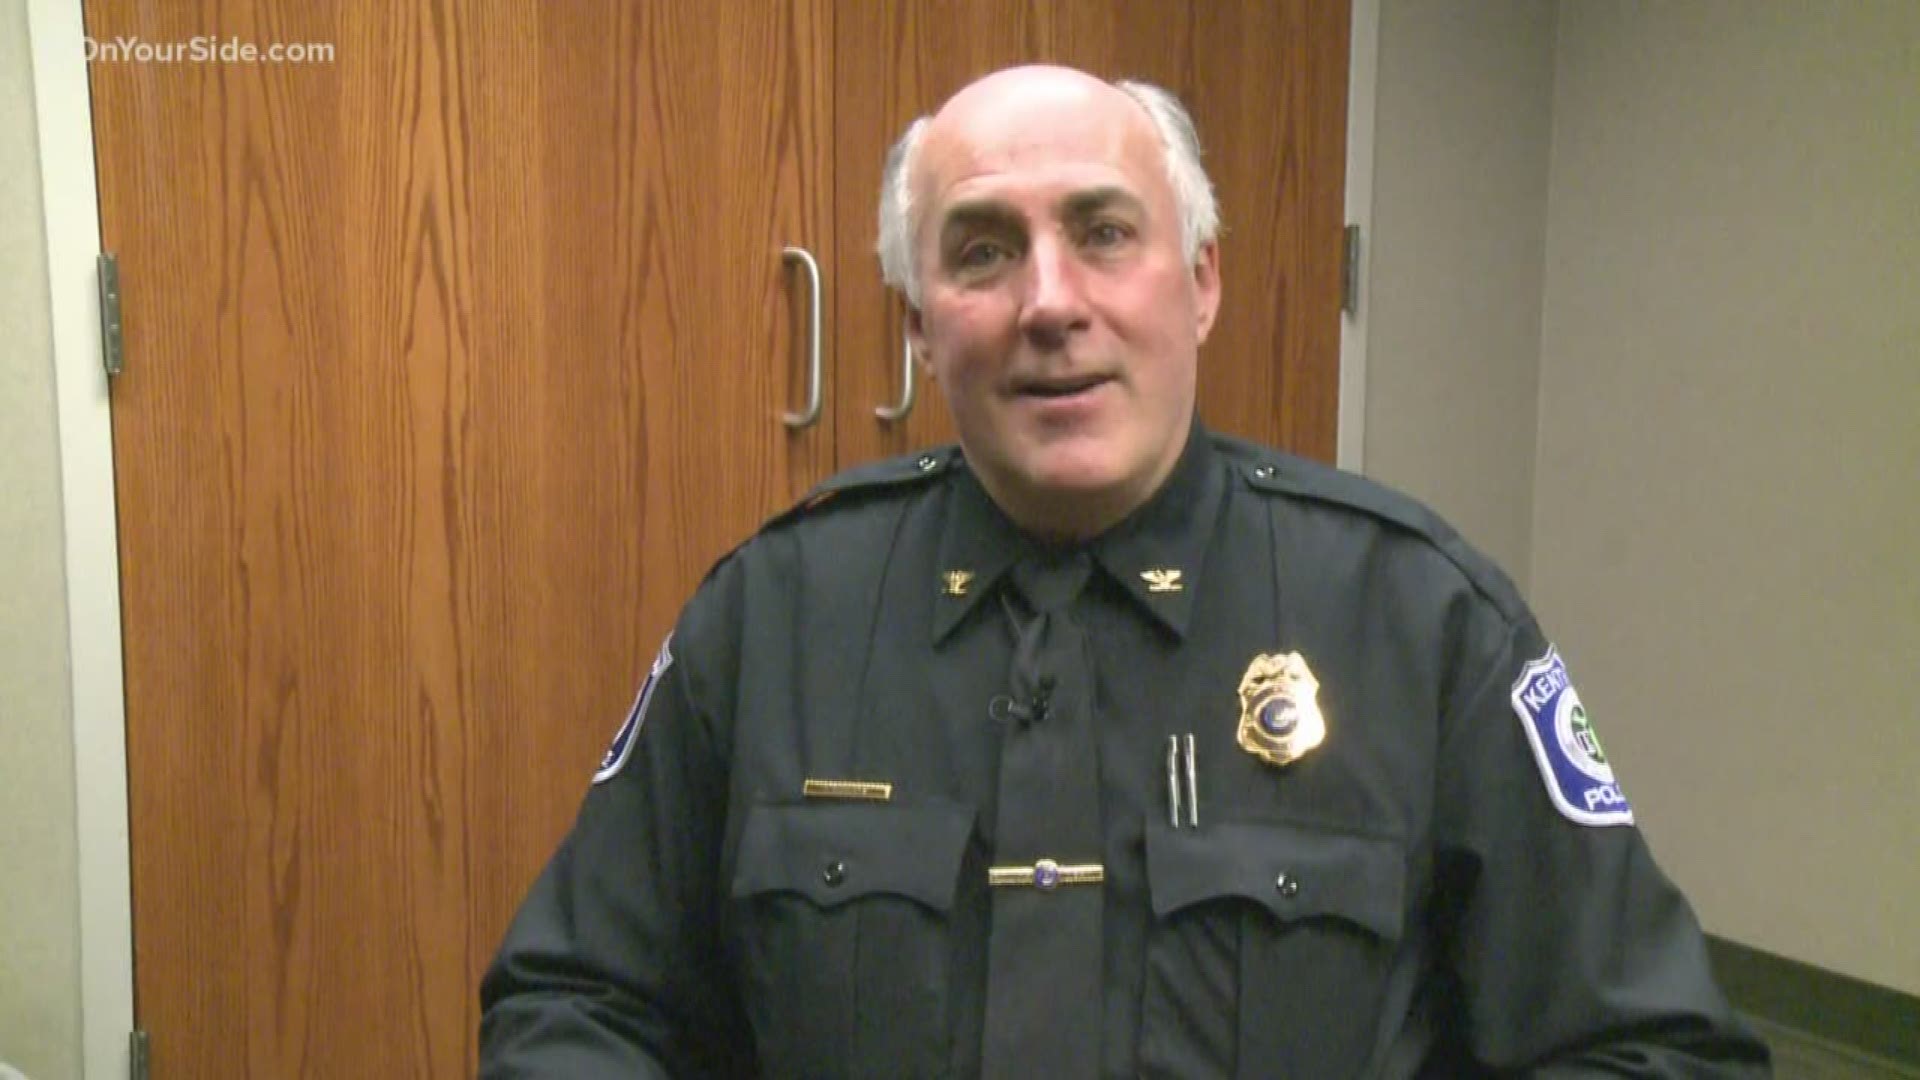 He is the first in Kentwood officer to move through the ranks from patrol to police chief.